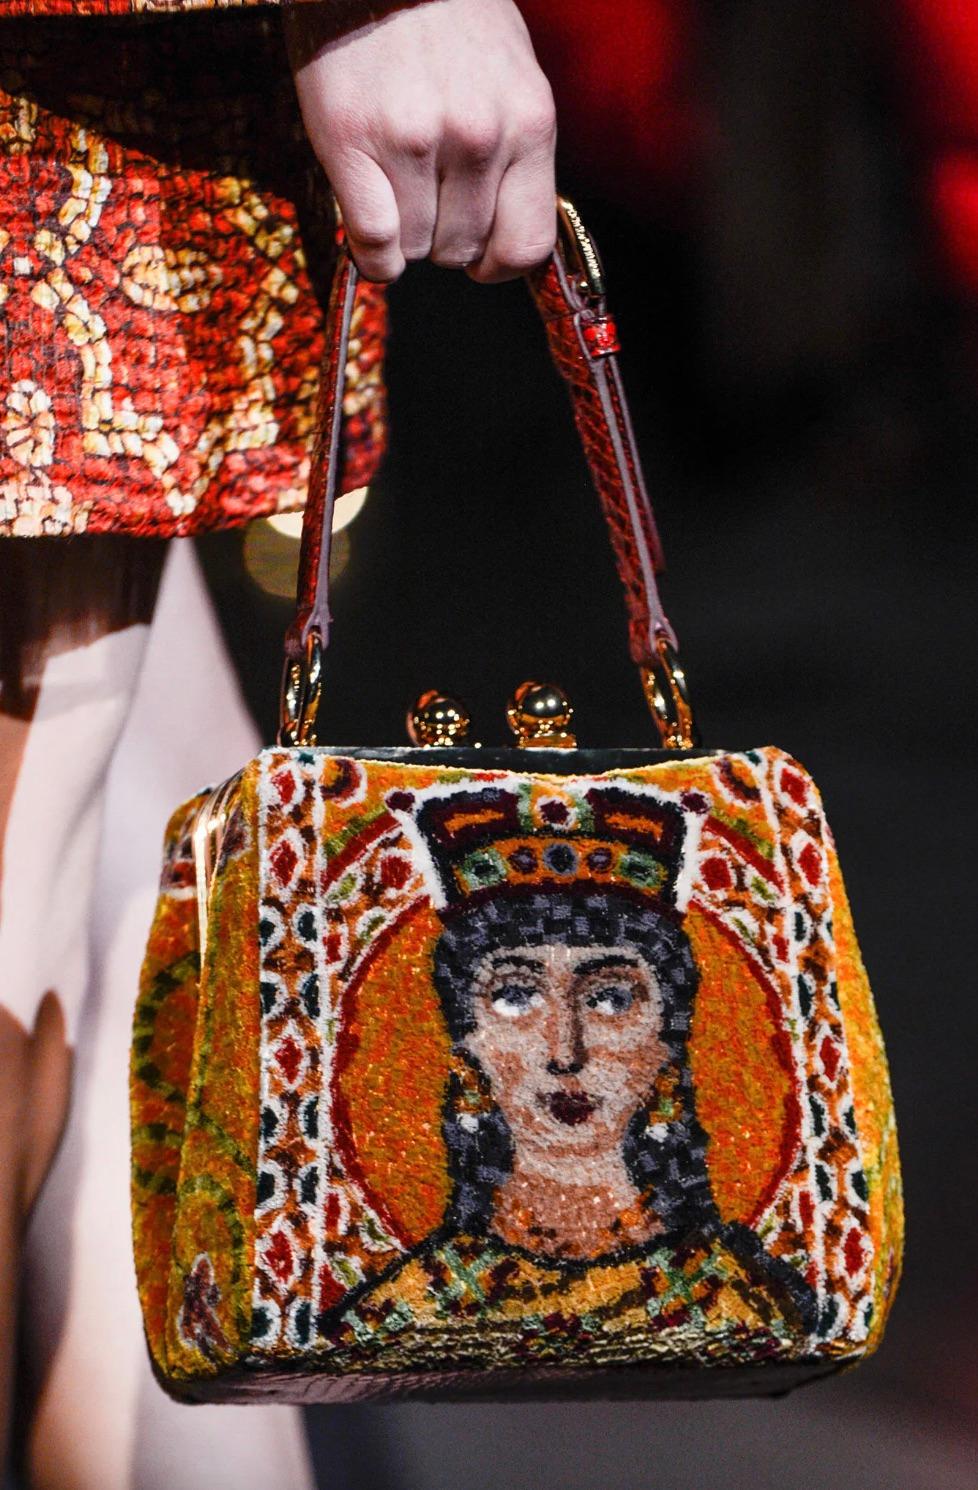 The Dolce&Gabbana Fall/Winter 2013 Queen Regina bag is a luxurious masterpiece, drawing inspiration from the enchanting mosaics of Sicily's Monreale Cathedral. This limited edition gem combines gold hardware, red python leather bottom and stra[, and